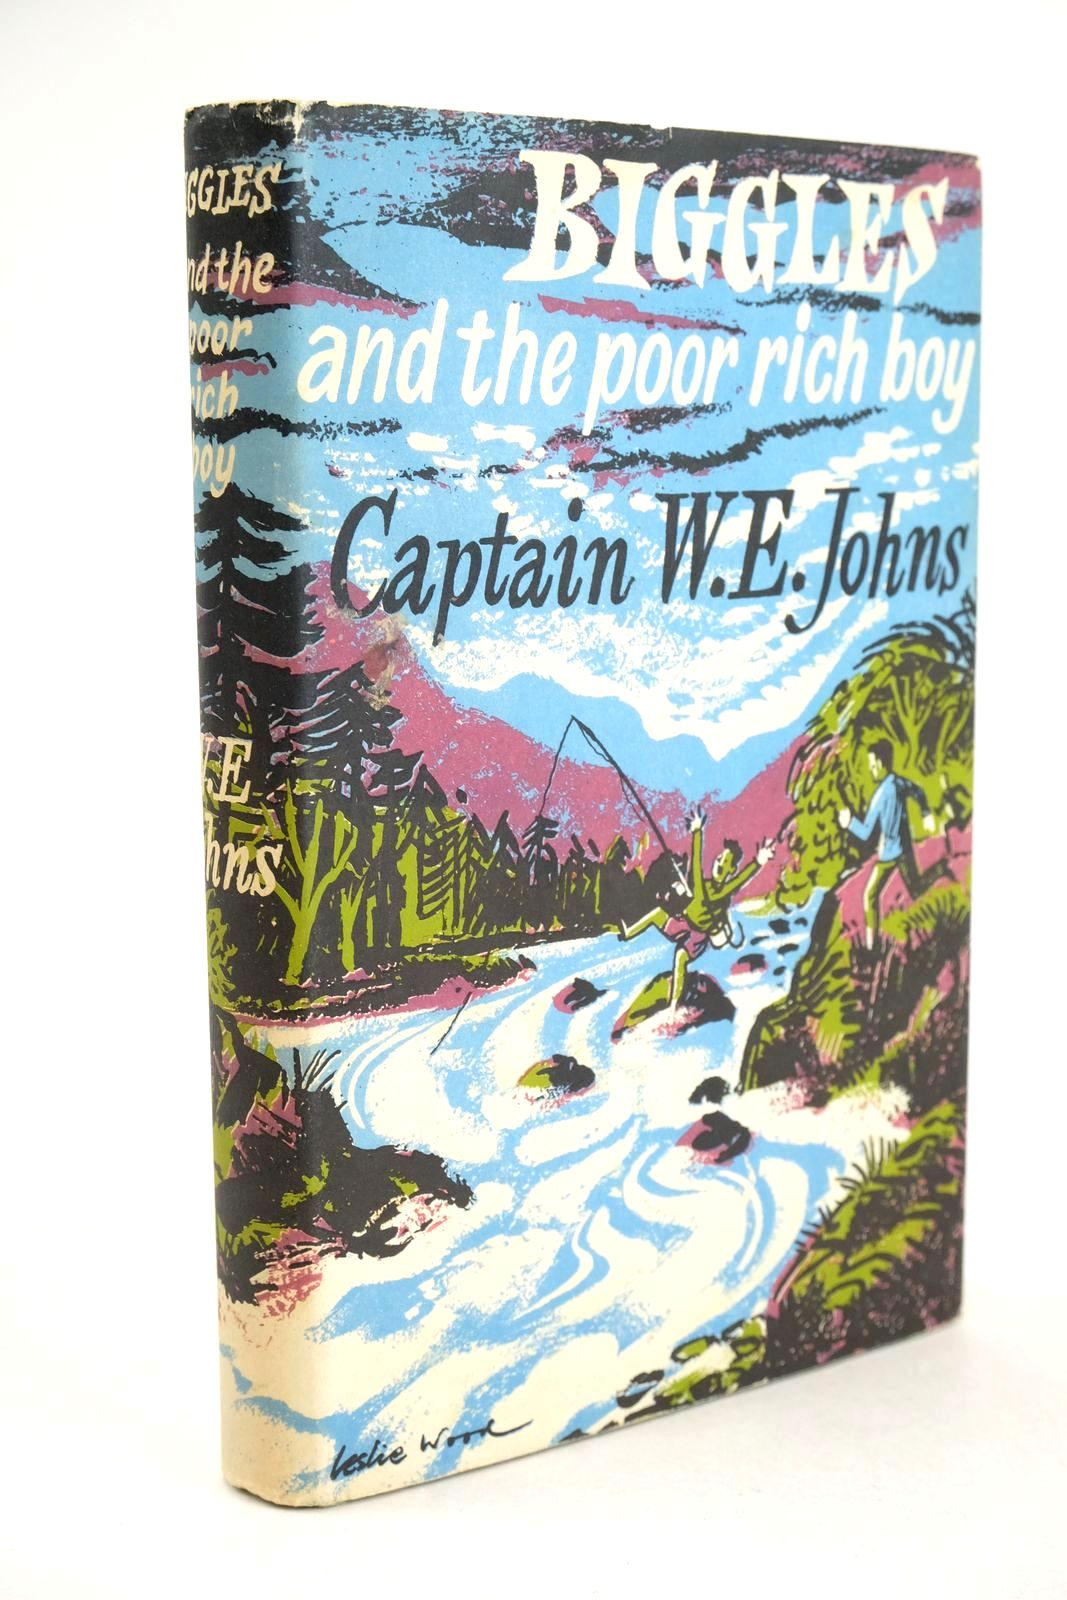 Photo of BIGGLES AND THE POOR RICH BOY written by Johns, W.E. illustrated by Stead, Leslie published by The Children's Book Club (STOCK CODE: 1326017)  for sale by Stella & Rose's Books